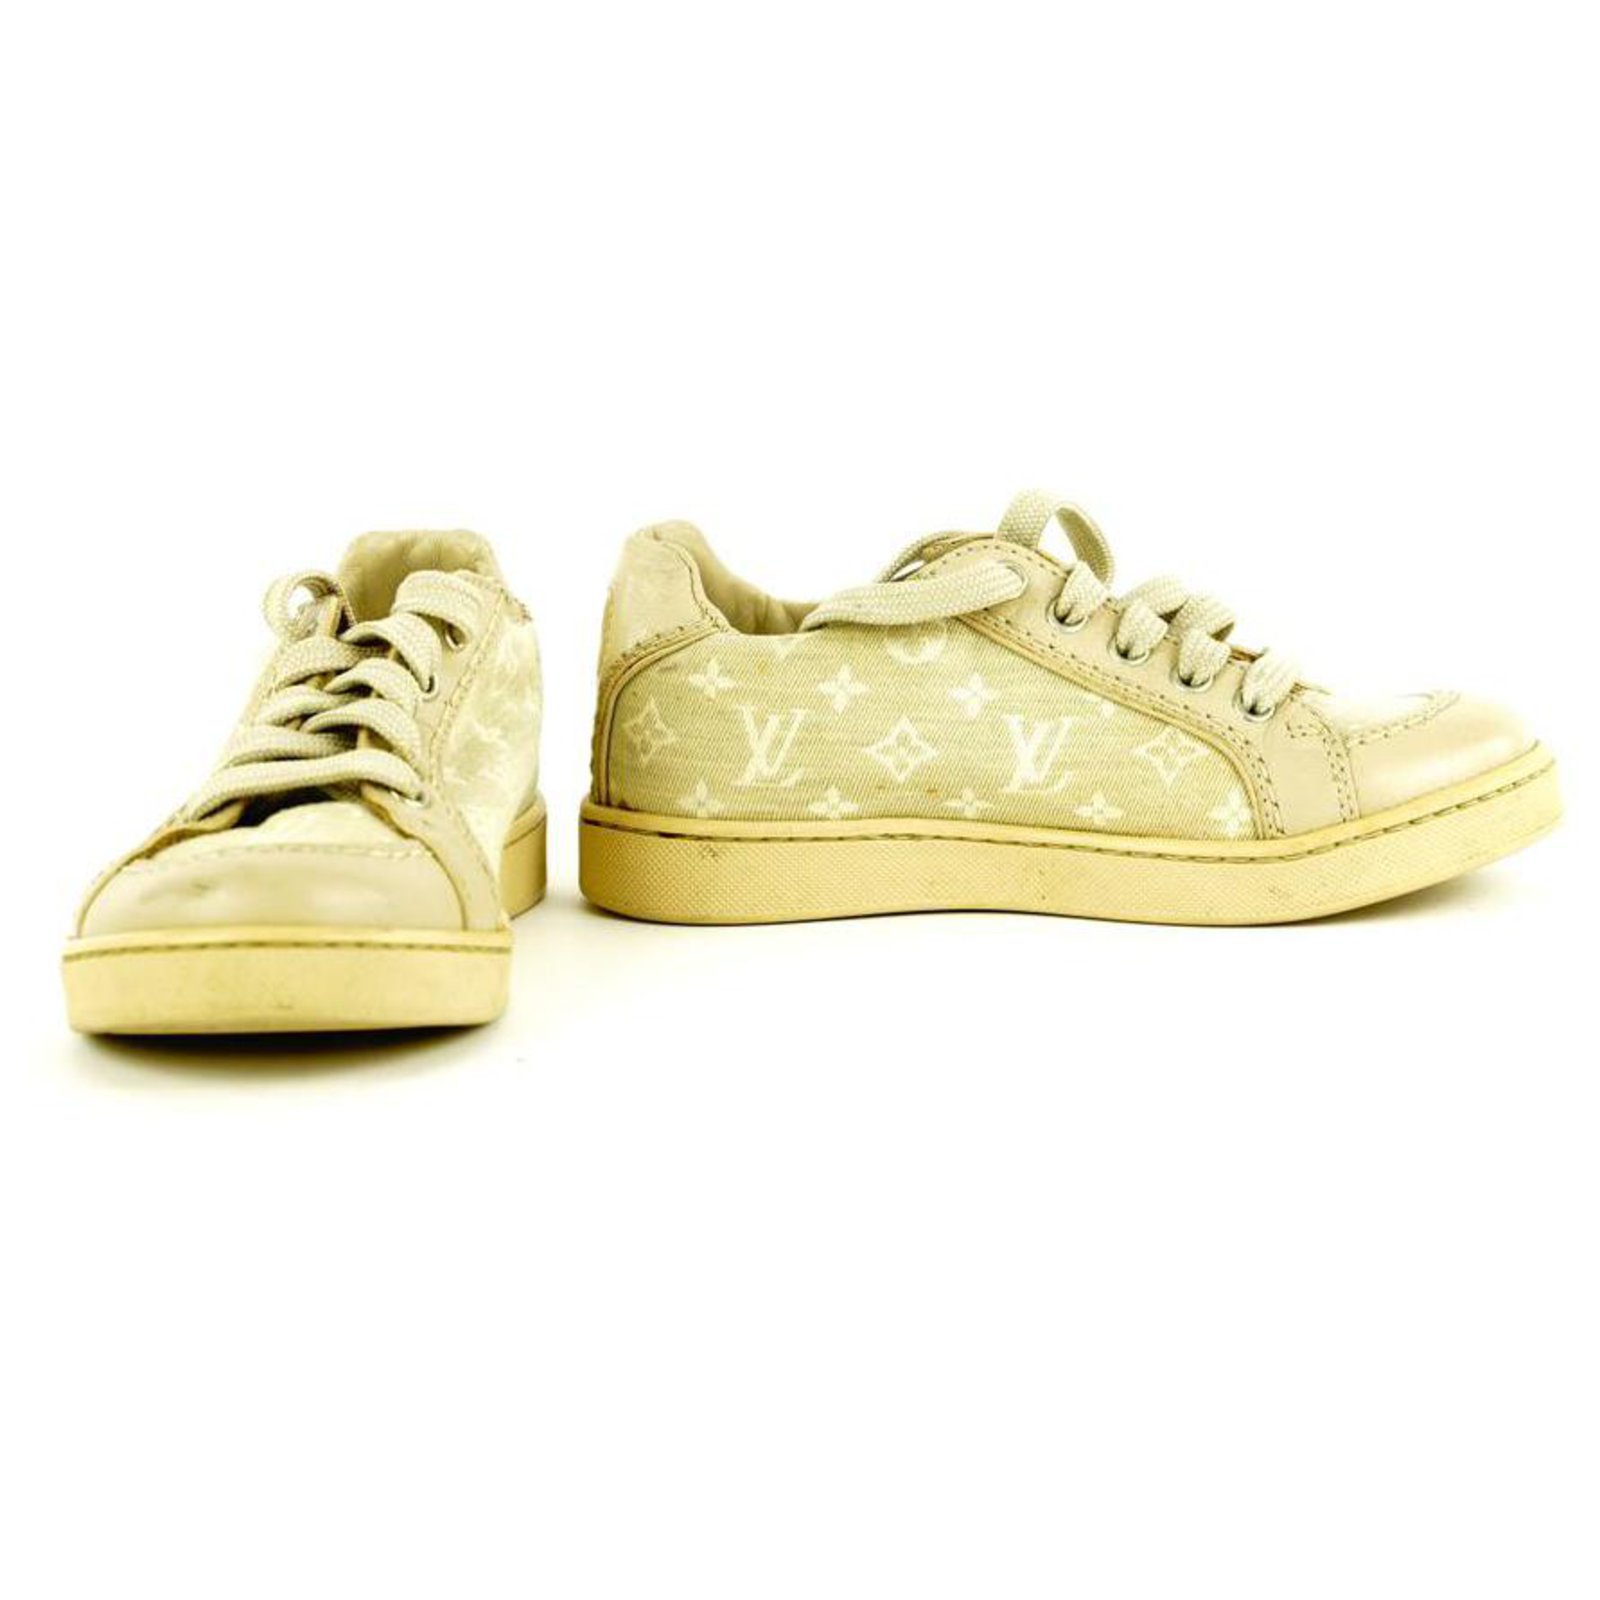 louis vuitton gold sneakers,lv sneakers